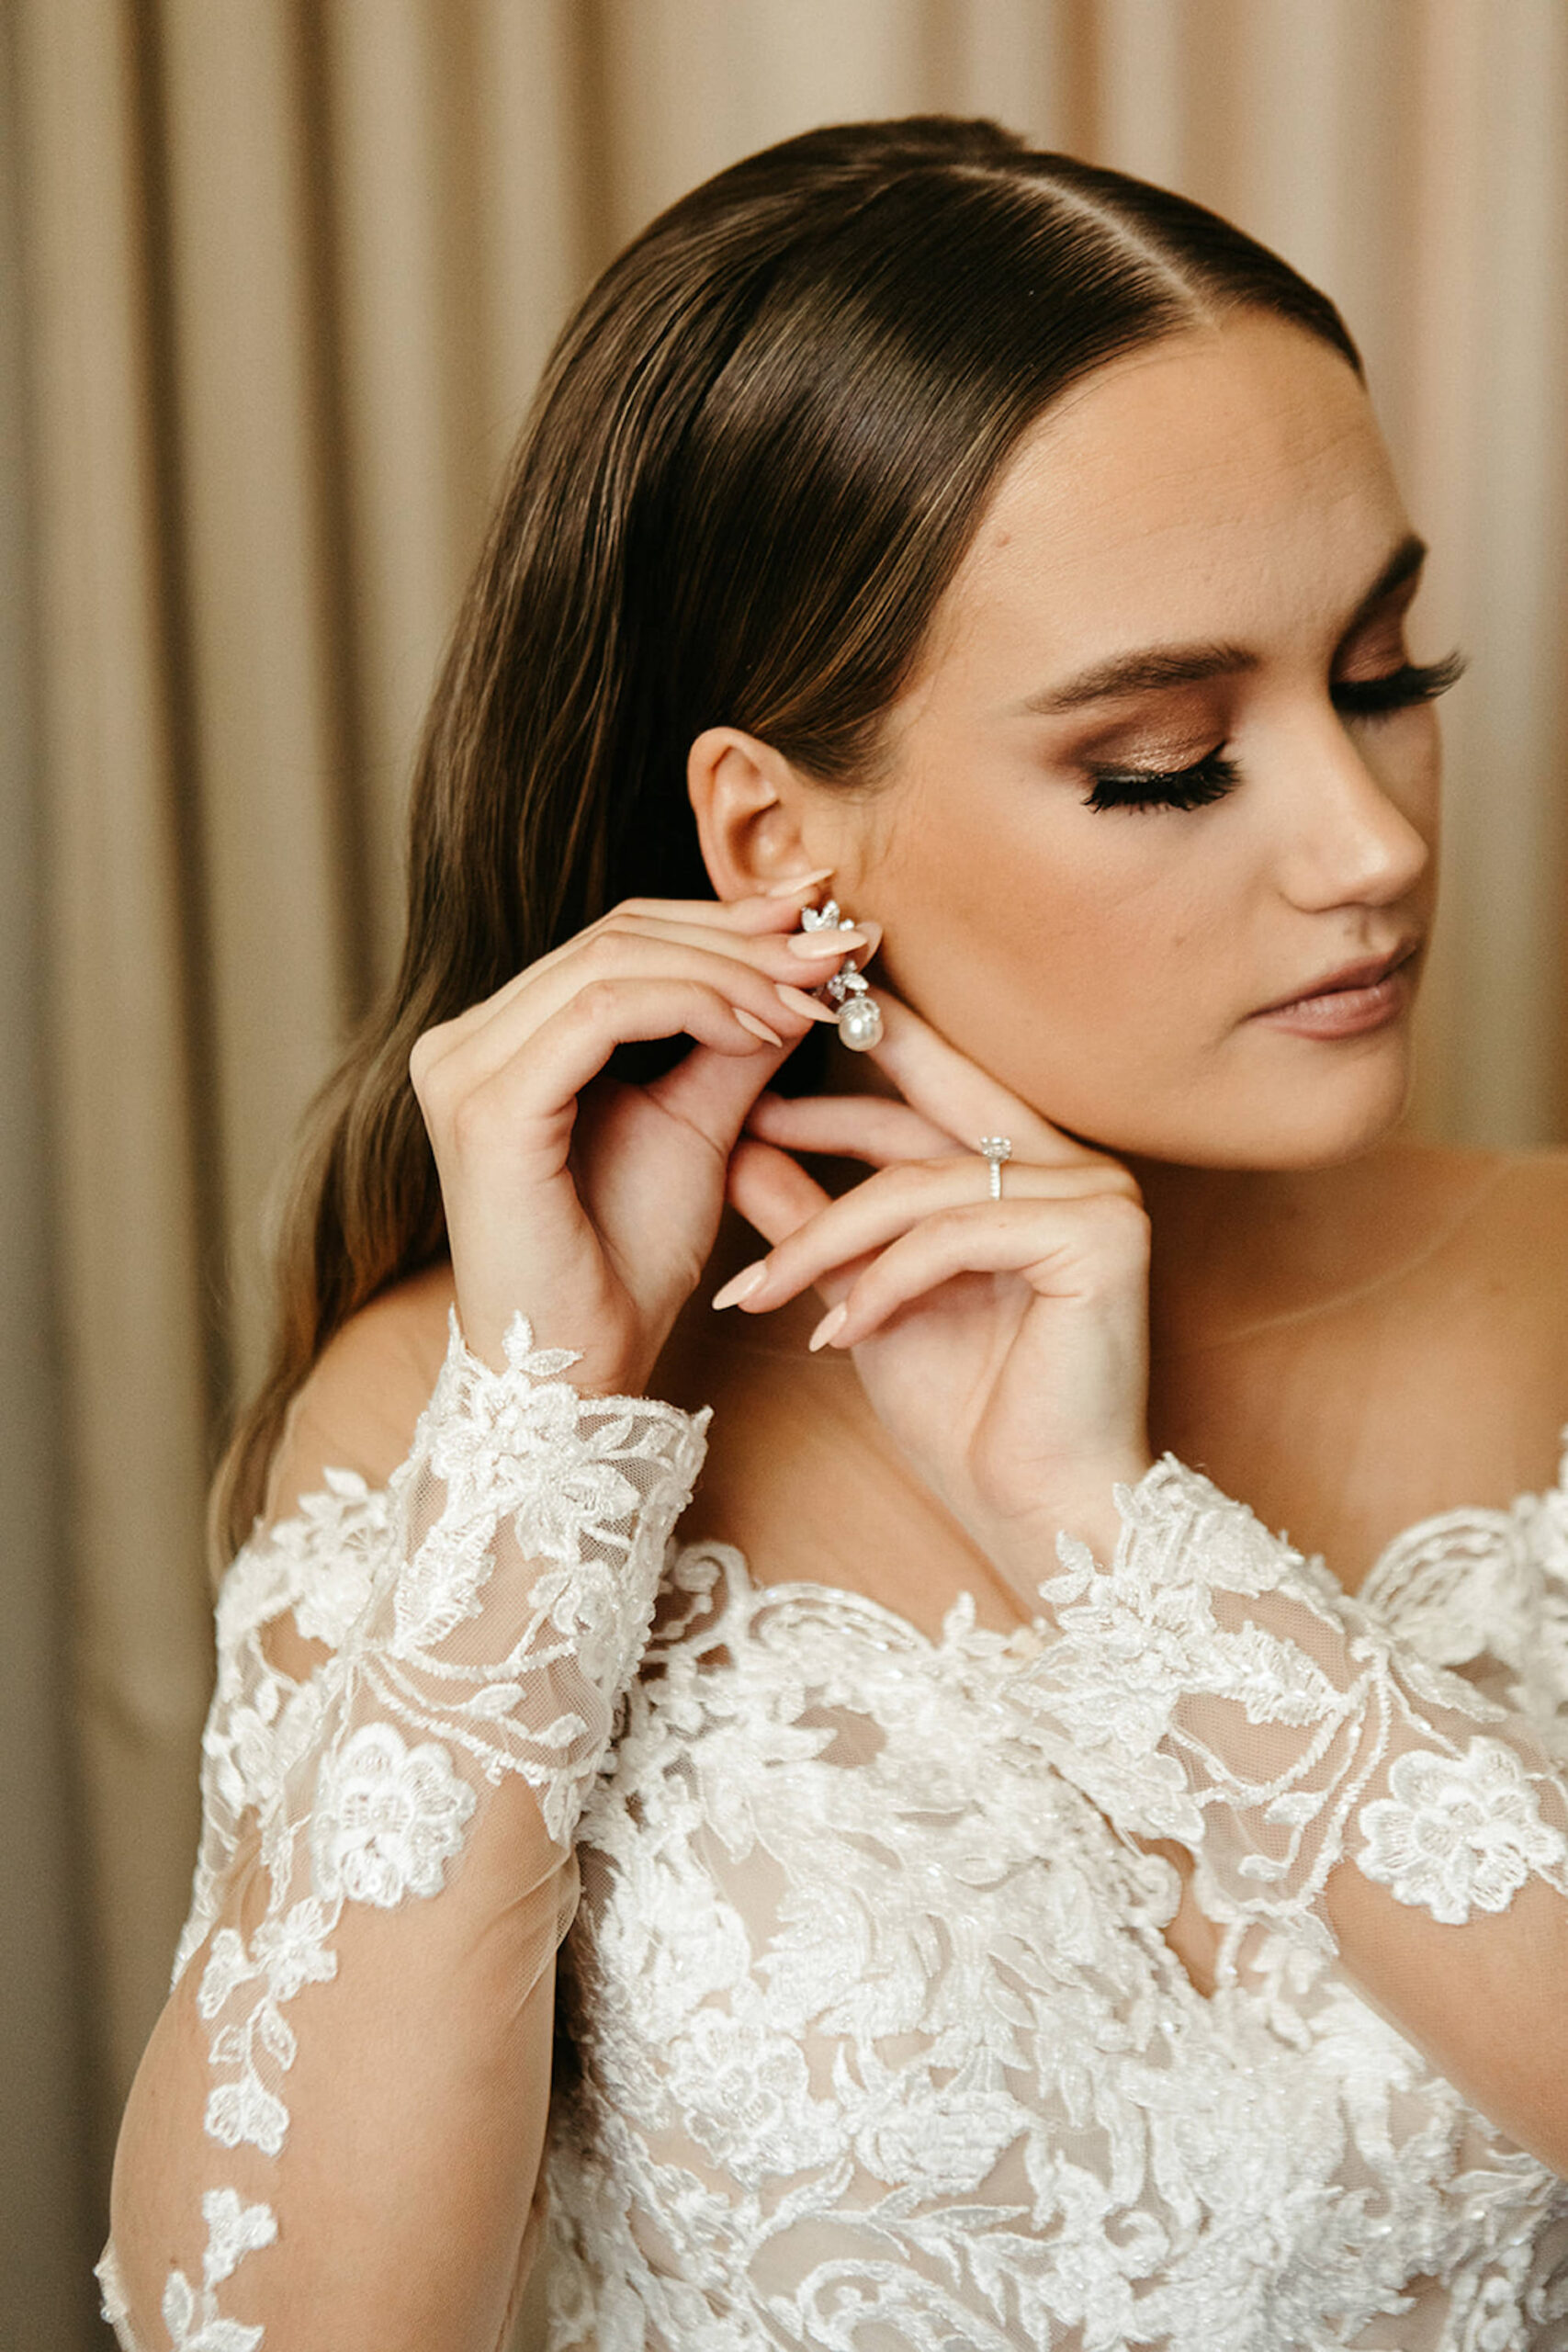 Bride Getting Ready Portrait with Glam Makeup and Off the Shoulder Lace Wedding Dress